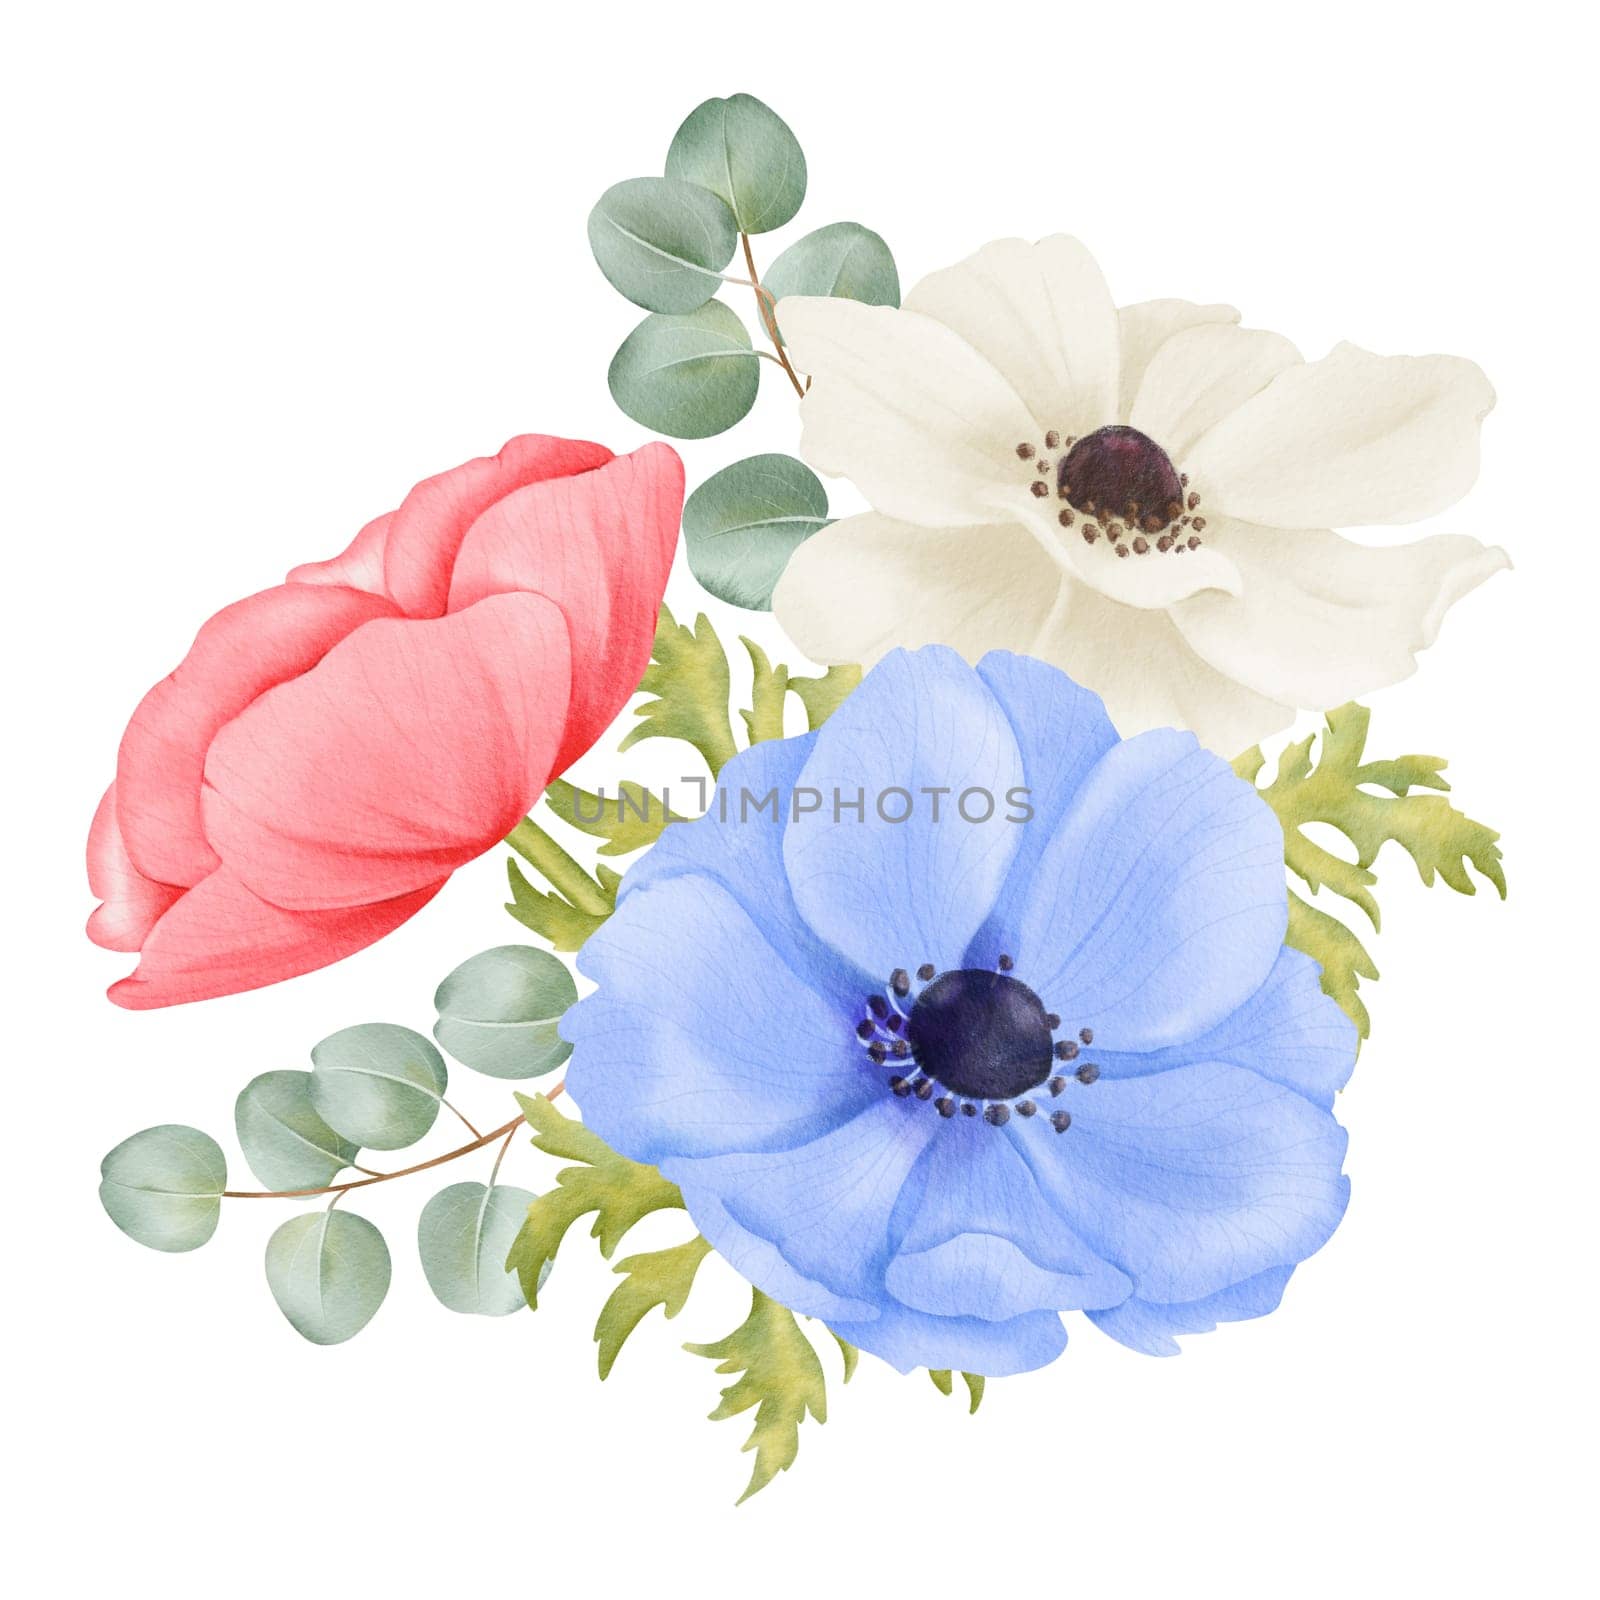 A watercolor composition pink, white and blue anemone flowers. fresh greenery and eucalyptus leaves. for wedding stationery, event invitations, botanical prints, art projects and interior decor by Art_Mari_Ka